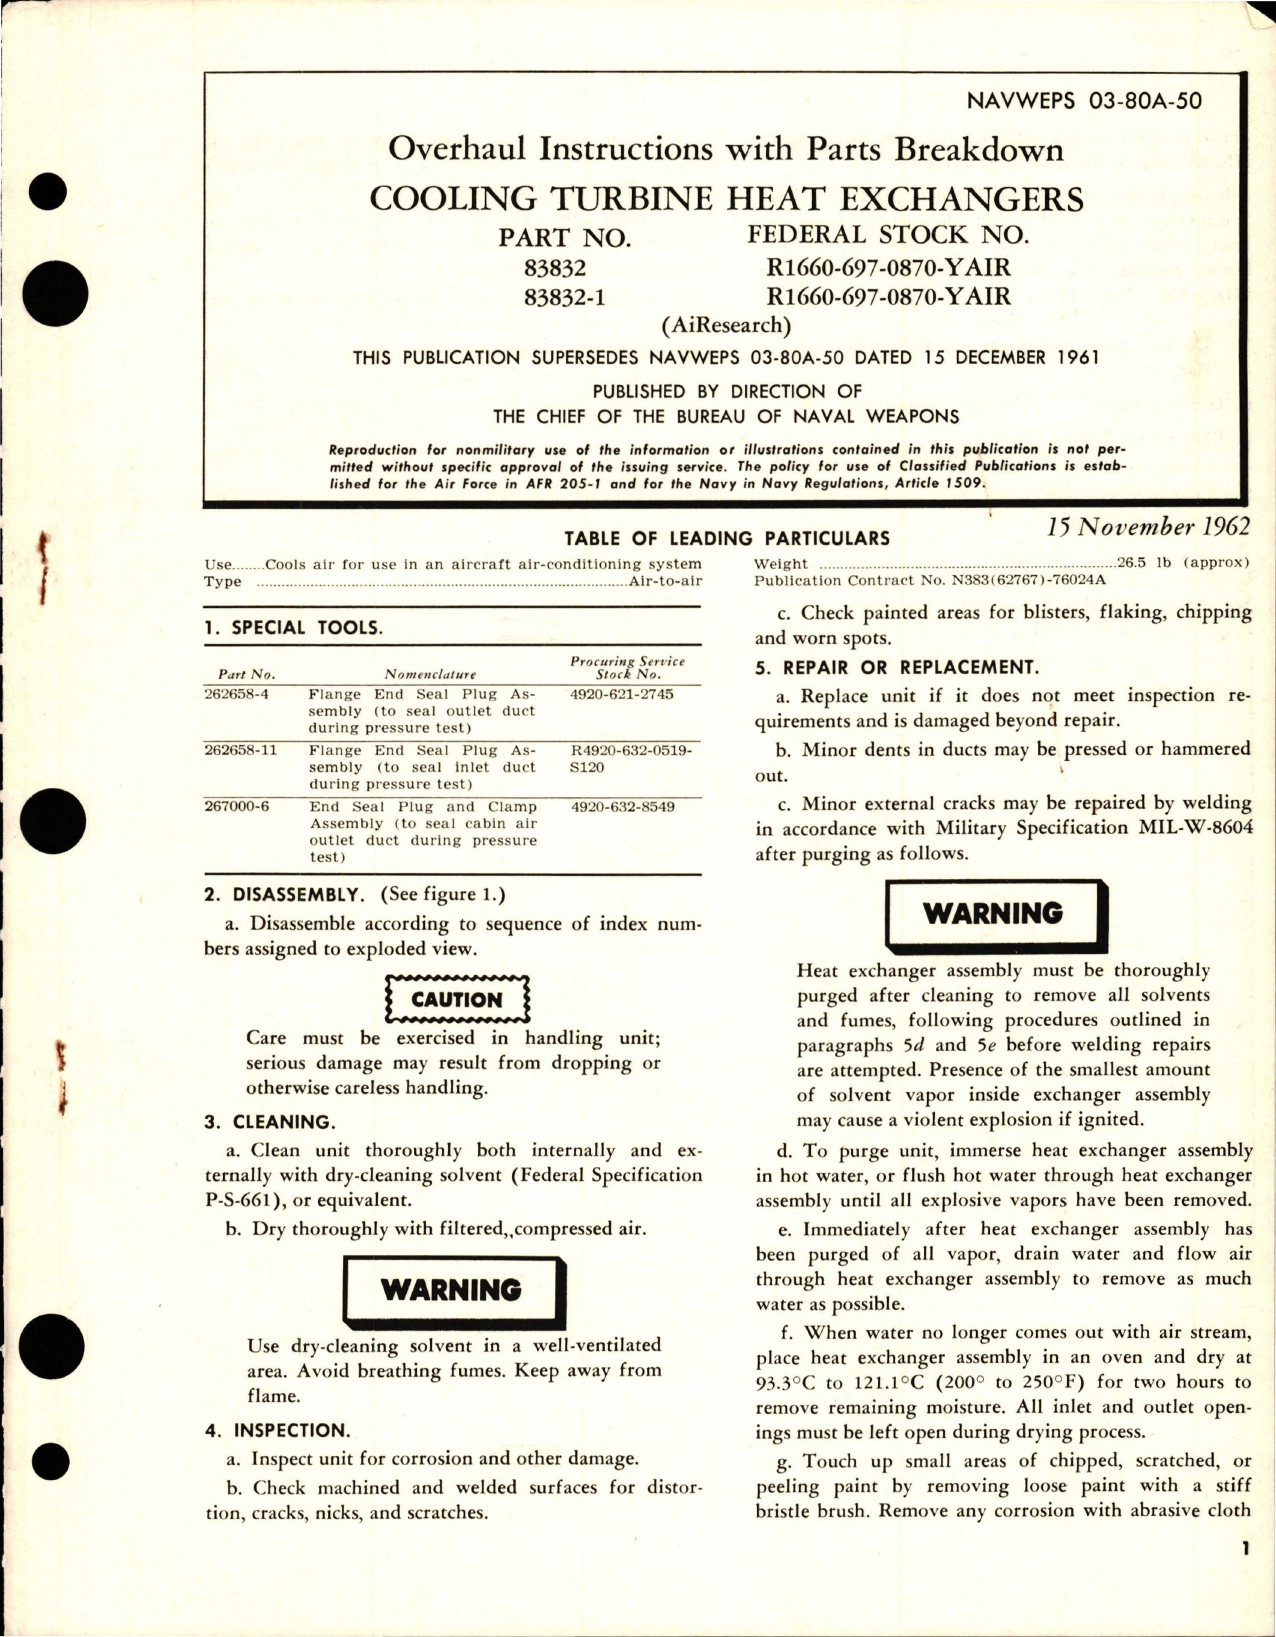 Sample page 1 from AirCorps Library document: Overhaul Instructions with Parts Breakdown for Cooling Turbine Heat Exchangers - Parts 83832 and 83832-1 